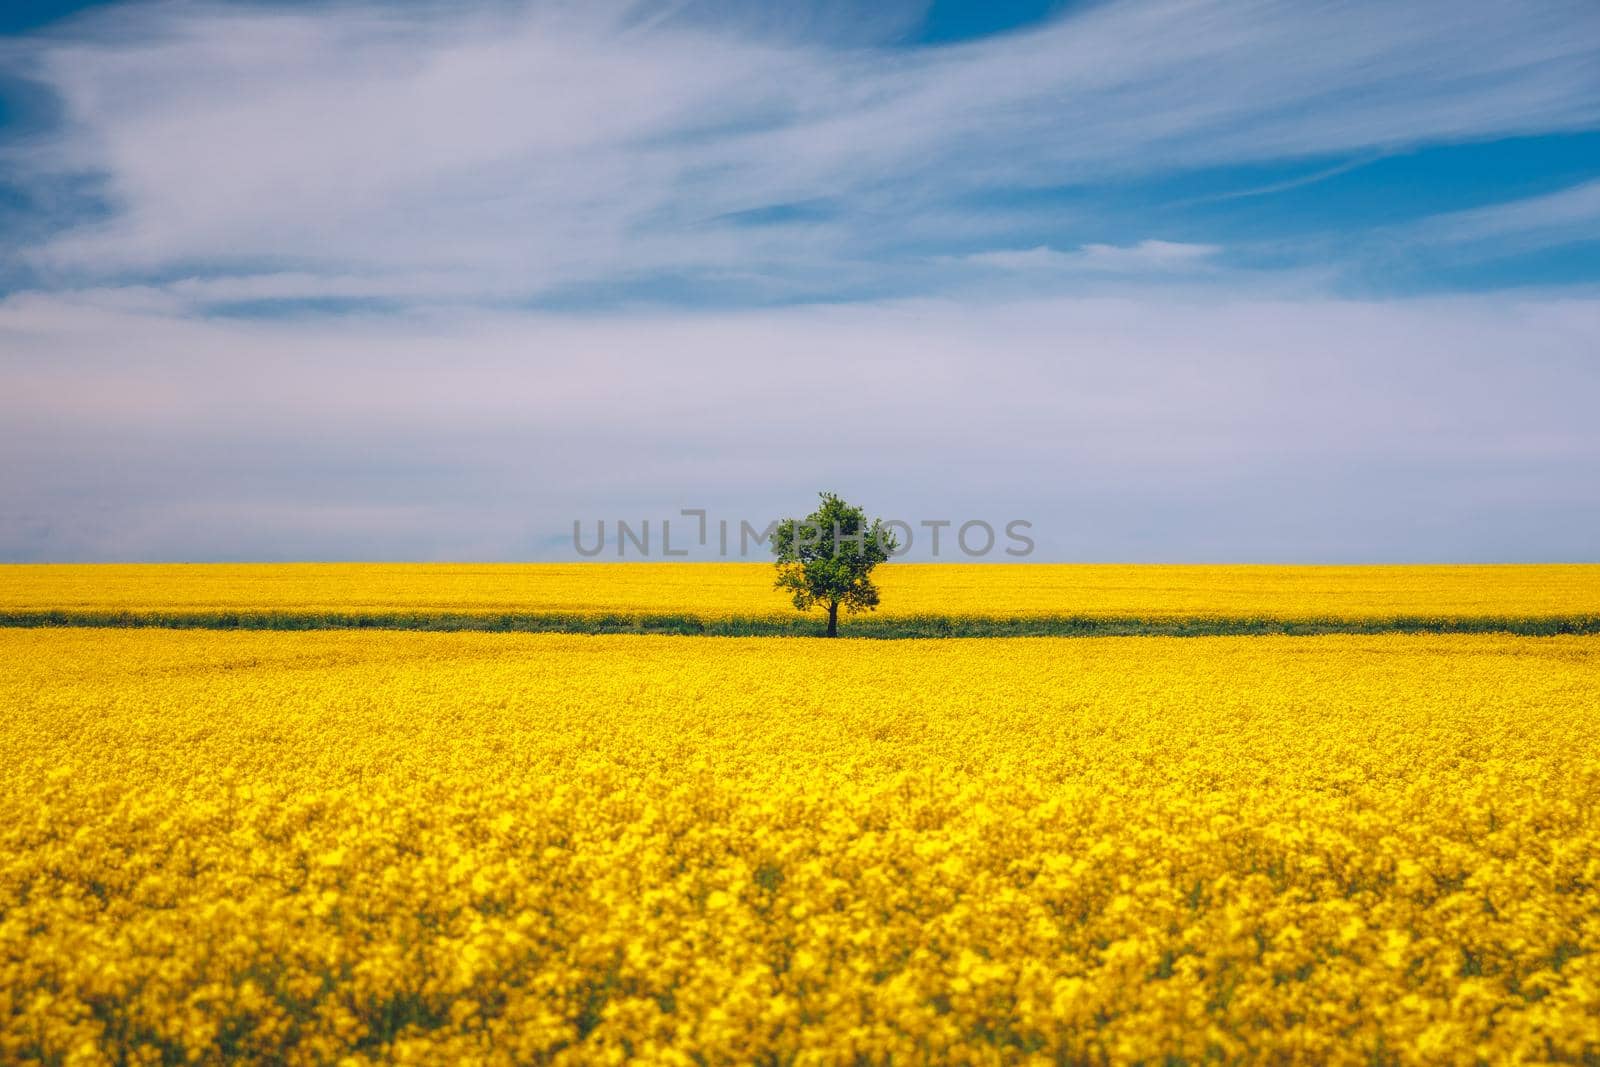 Tree in field of rapeseed under blue sky with clouds, spring landscape. Lone tree in yellow rape-seed field.